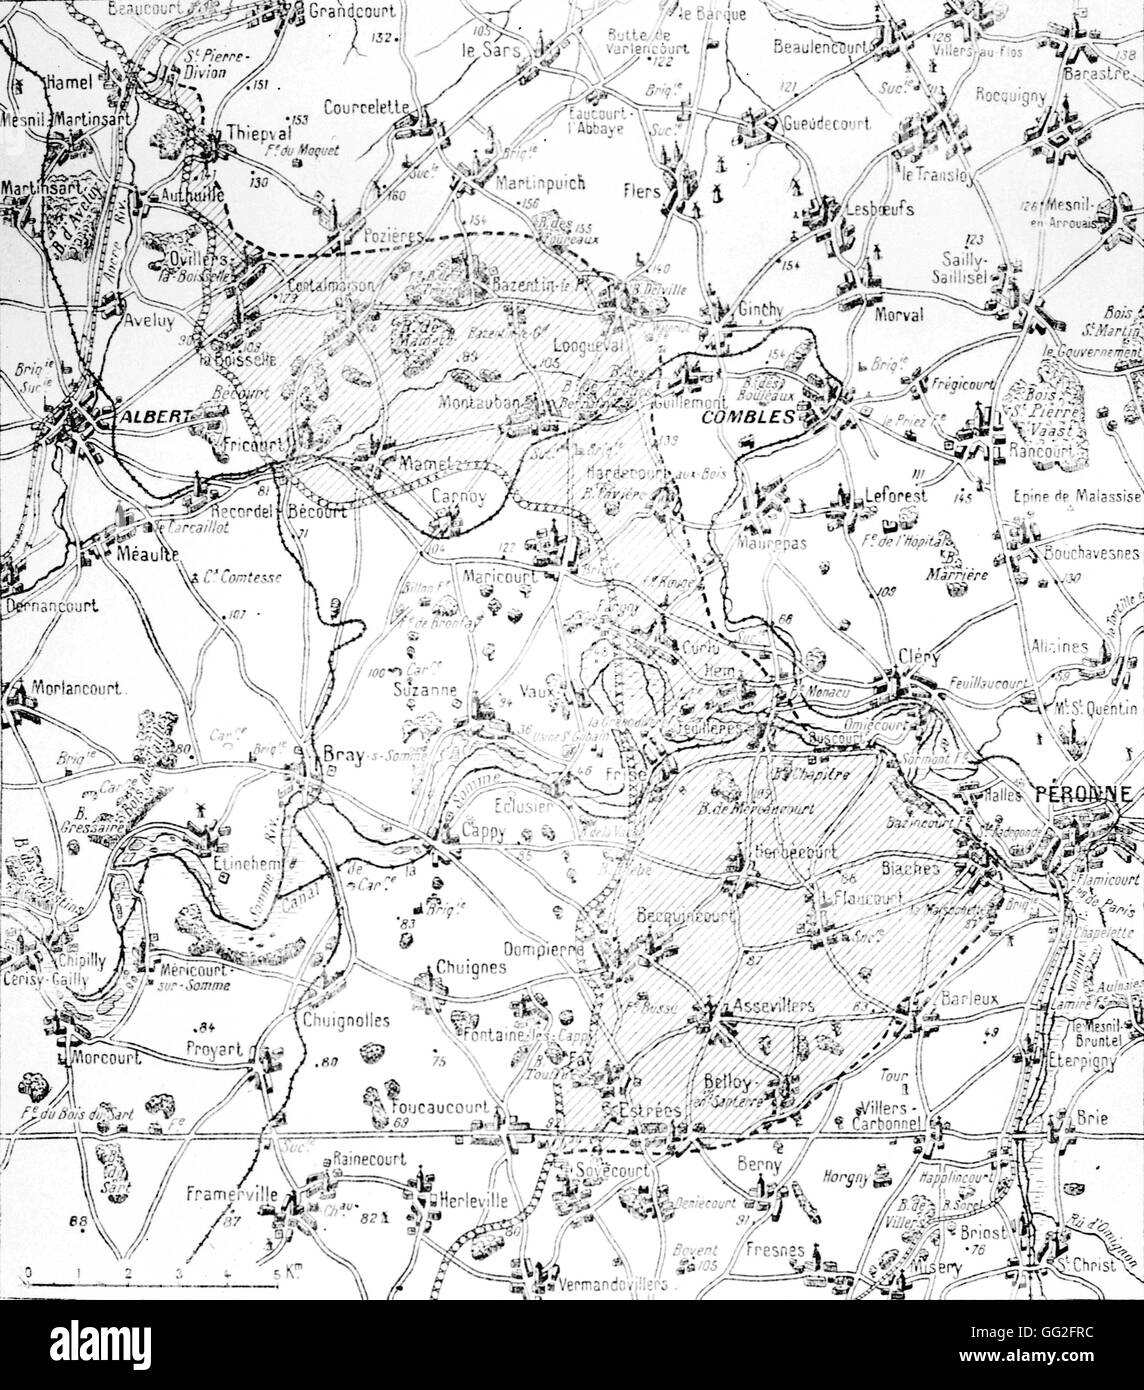 First World War. Sketch of the British-French offensive ground (North and South of the Somme)commenced on the 1st July at the Battle of the Somme. Stock Photo